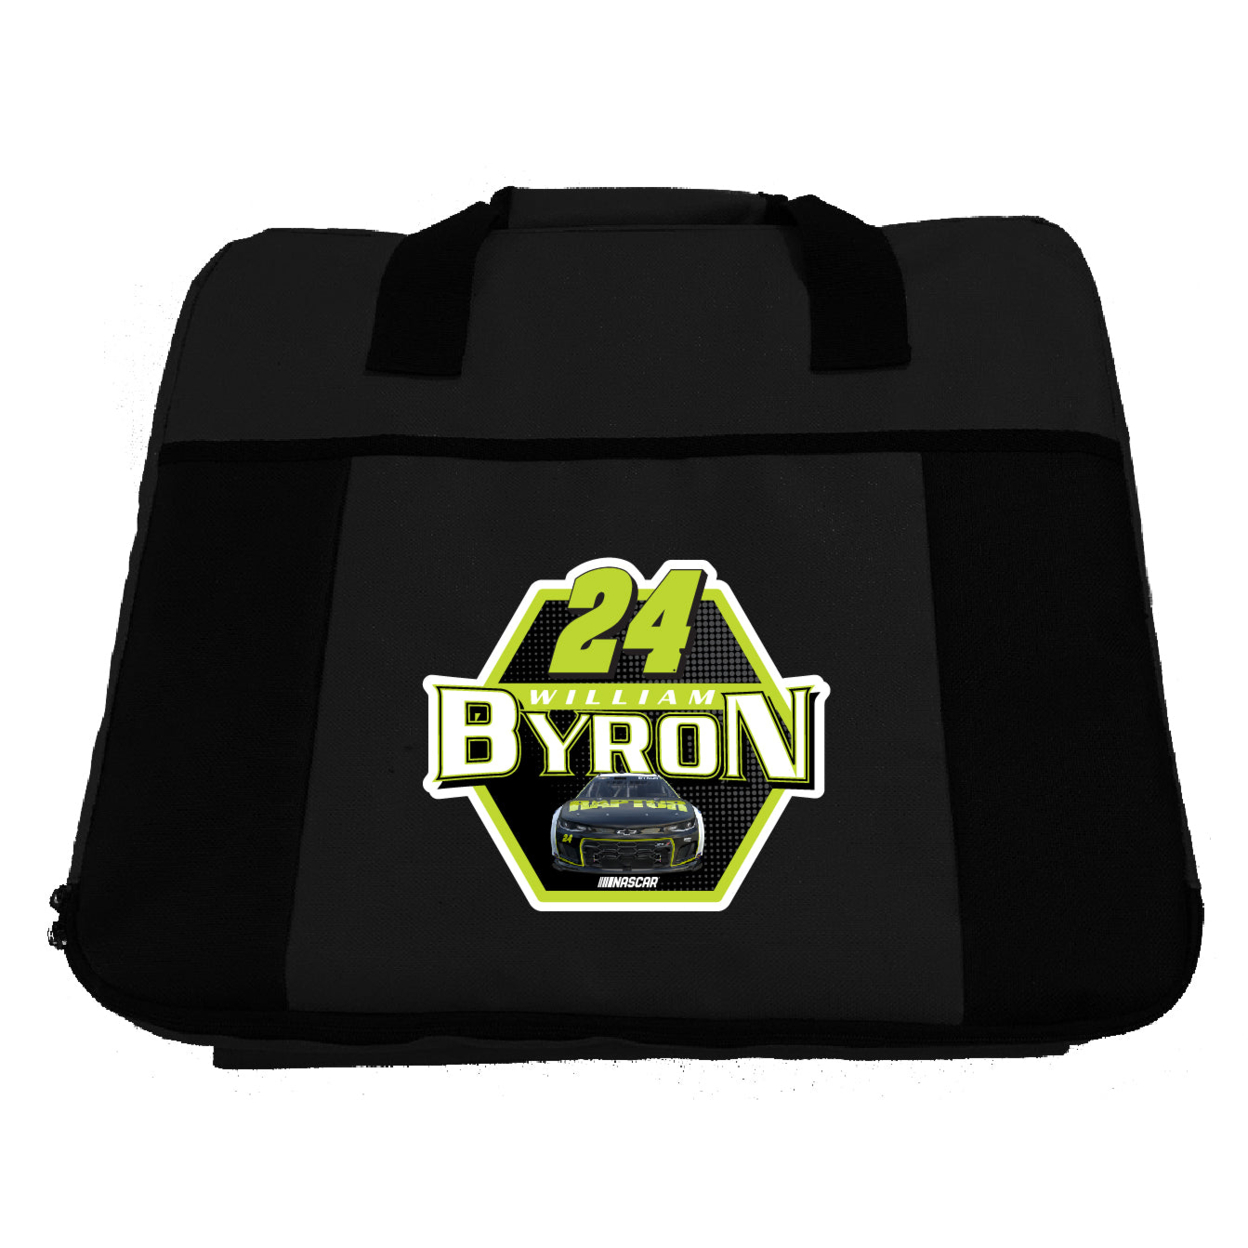 #24 William Byron Officially Licensed Deluxe Seat Cushion